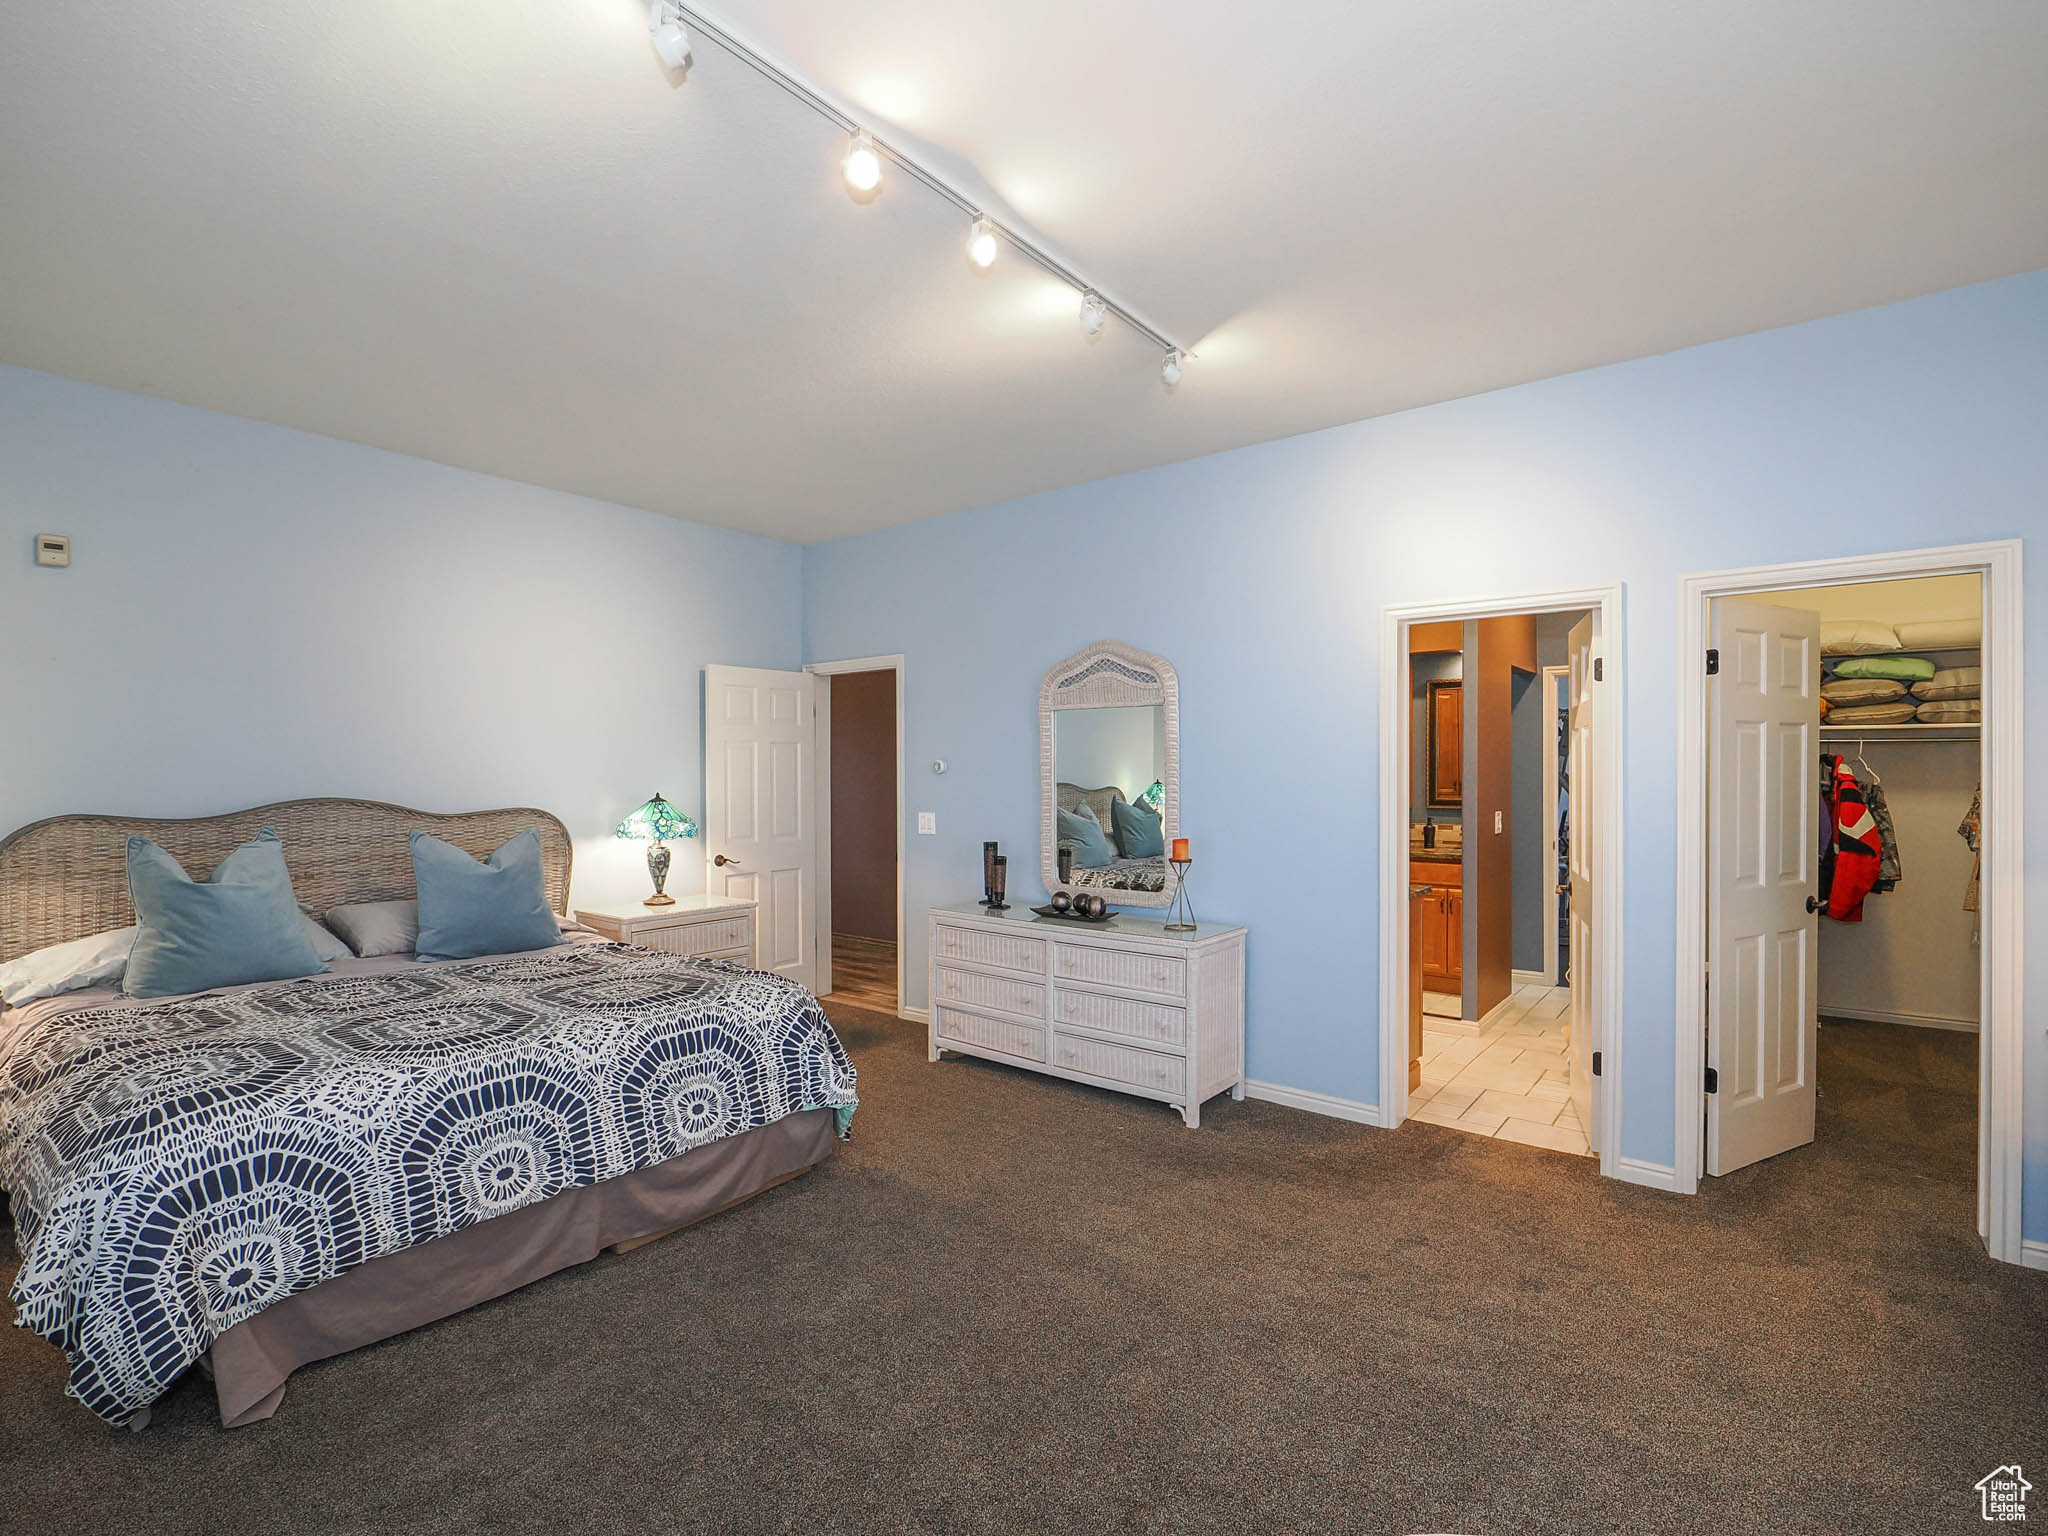 Large Basement bedroom. Offers patio access, walk-in closet, and Jack-and-Jill bathroom